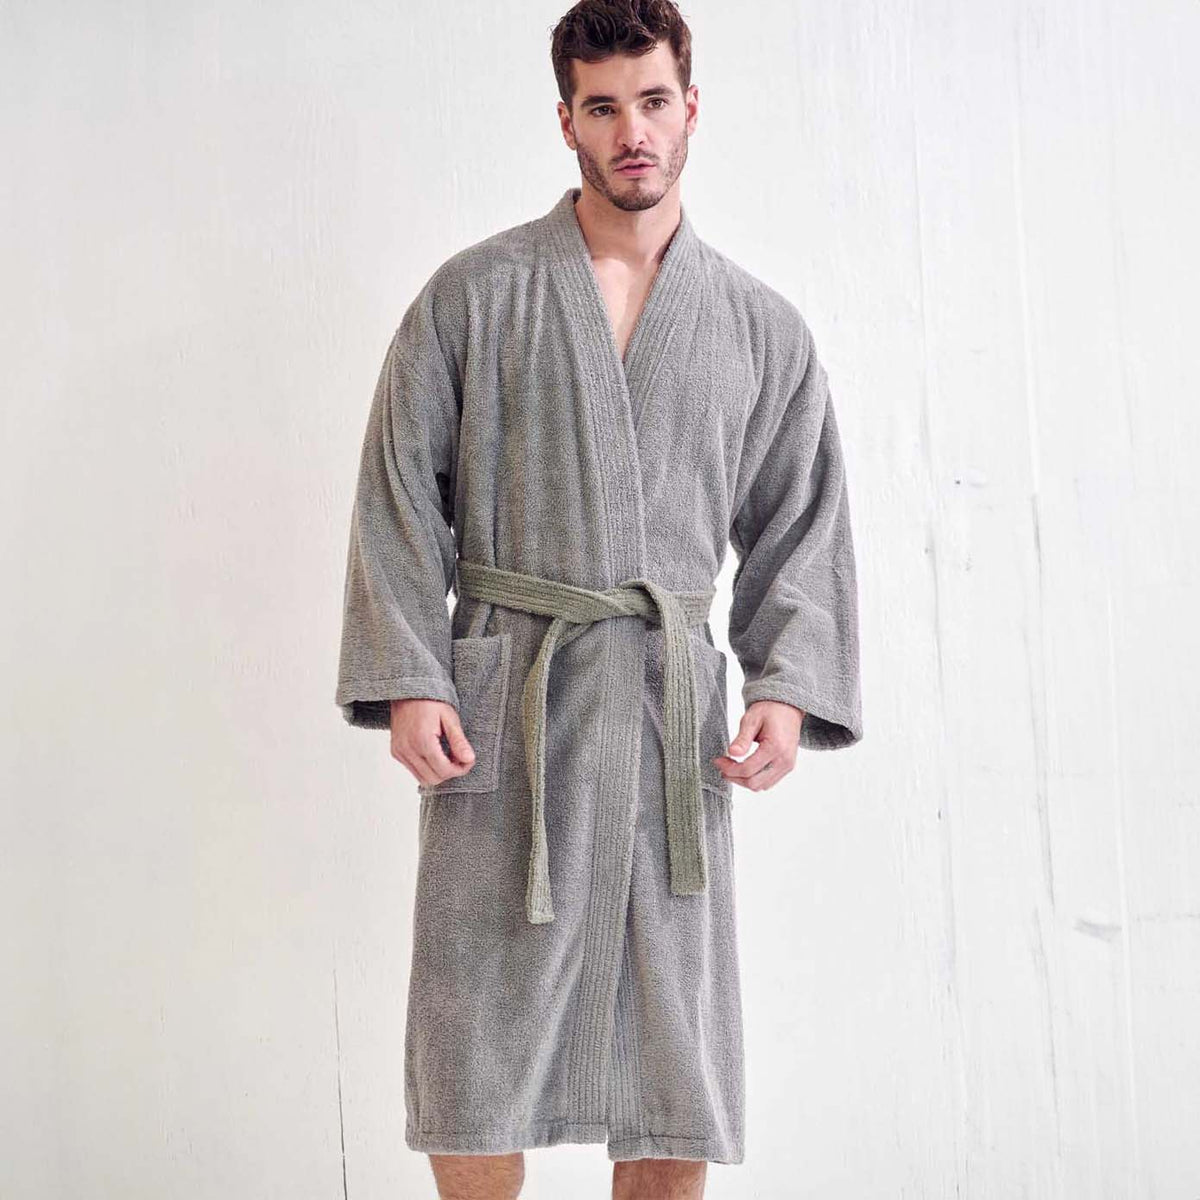 The Best Men's Robes Will Make You Feel Like A King - GQ Middle East